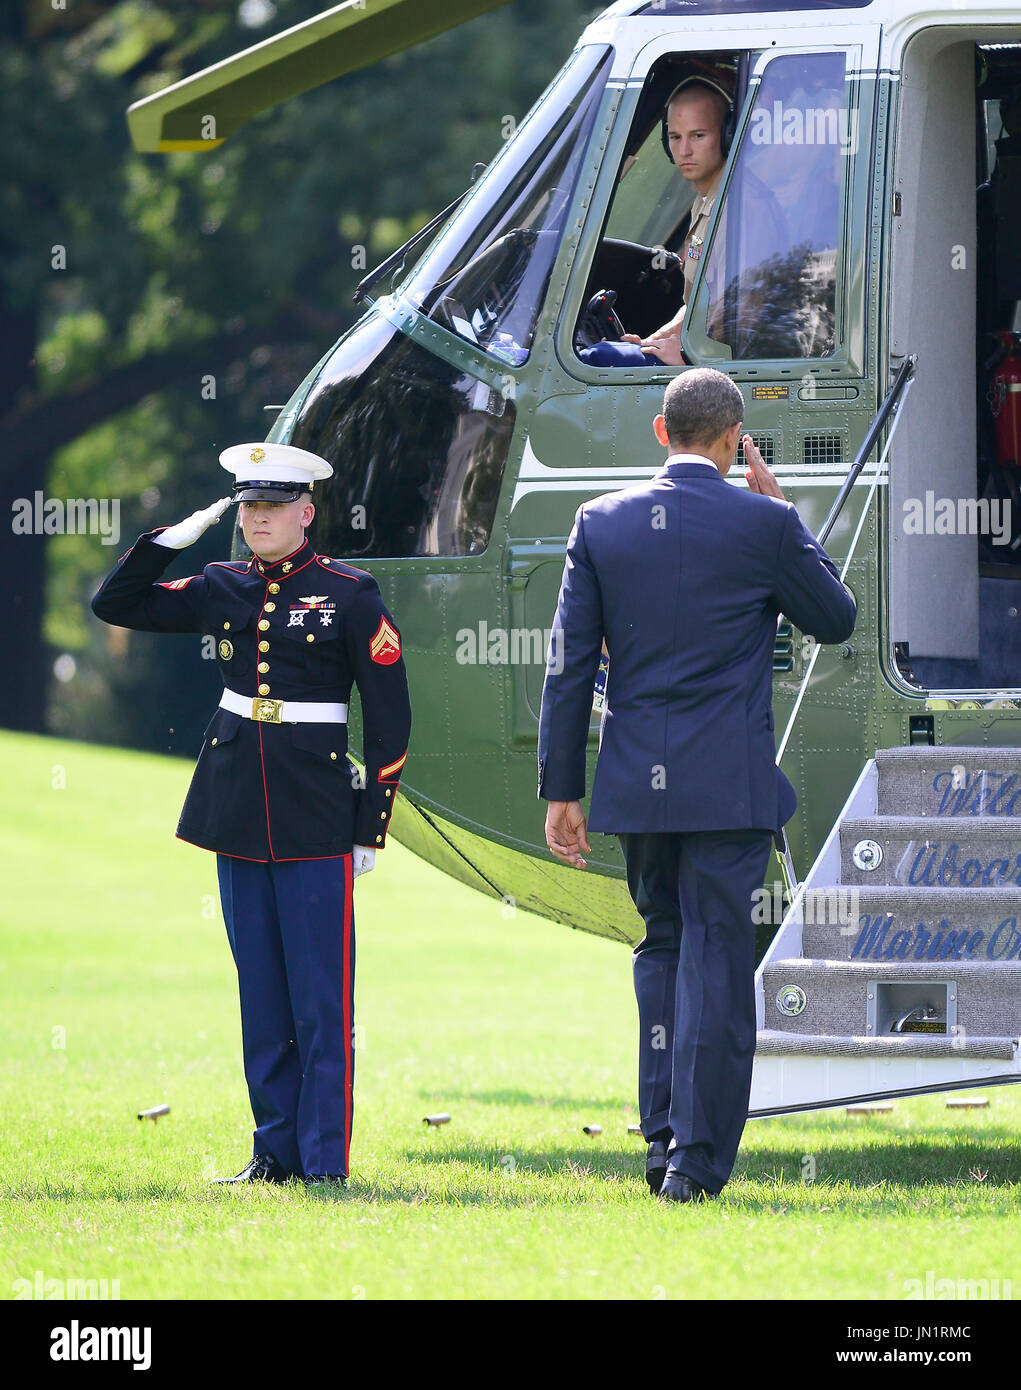 United States President Barack Obama salutes the Marine Guard as he boards Marine One to depart the White House in Washington, D.C. for Henderson, Nevada on Sunday, September 30, 2012..Credit: Ron Sachs / Pool via CNP Stock Photo